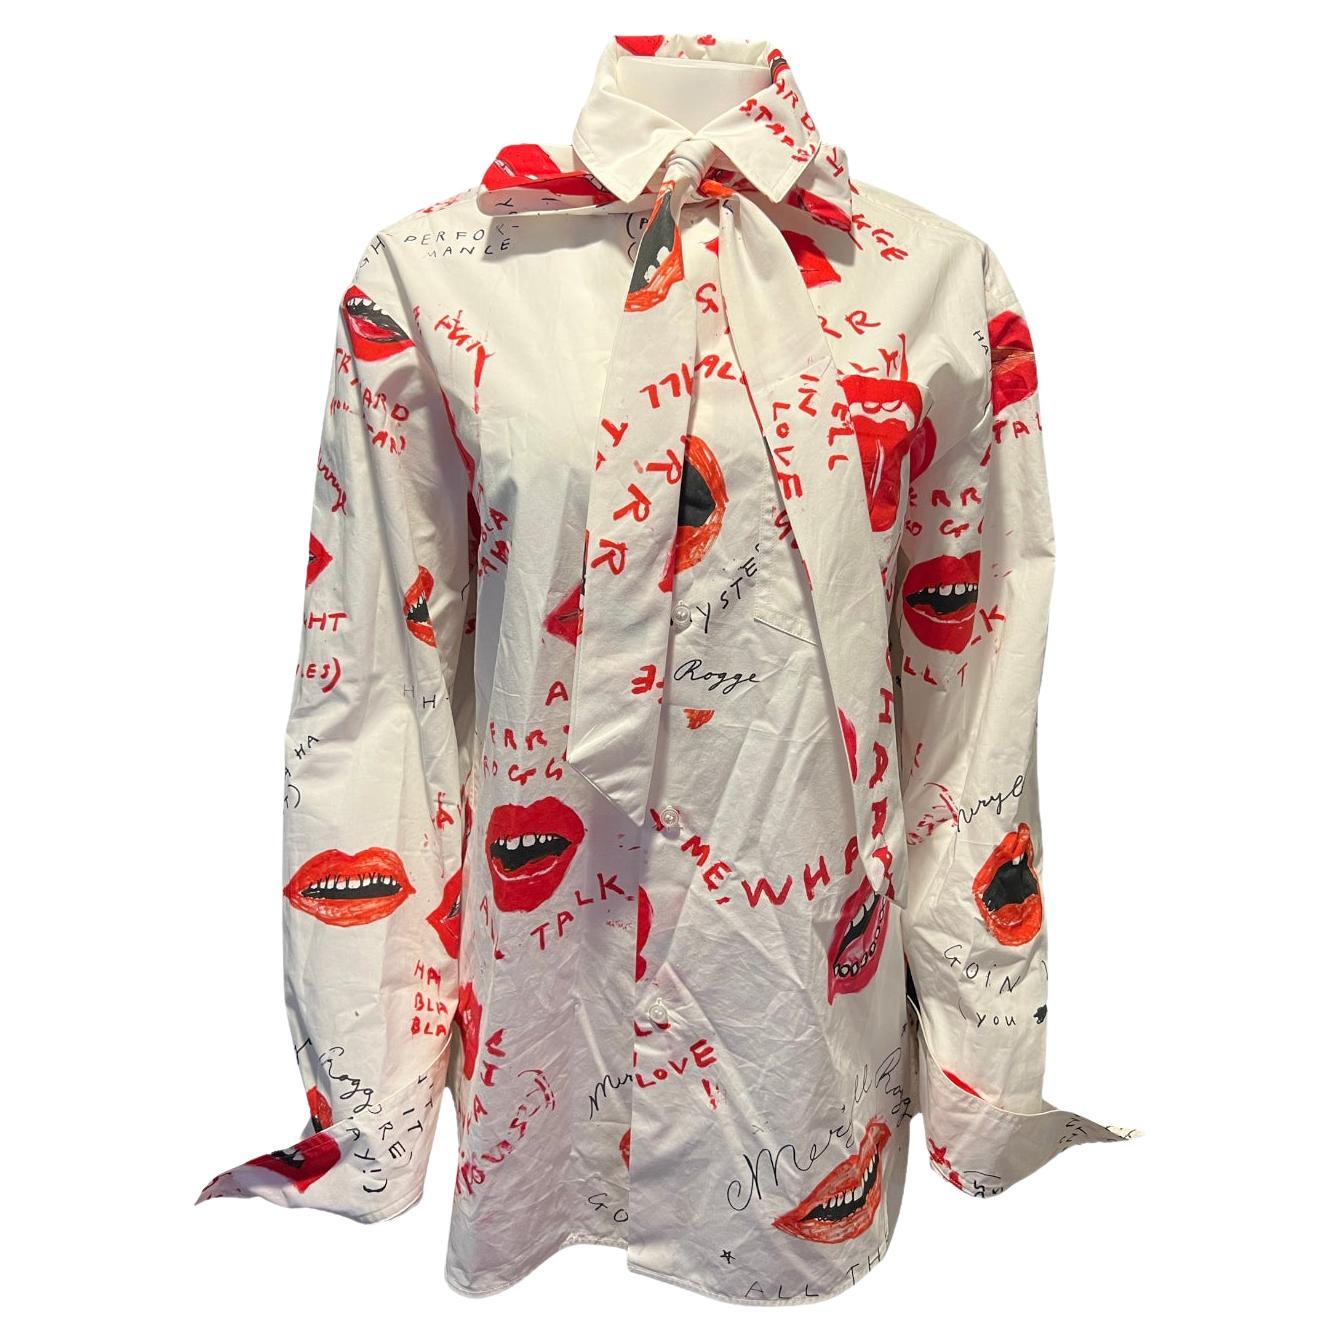 Meryll Rogge White and Red Button Down Shirt, Size 38 For Sale